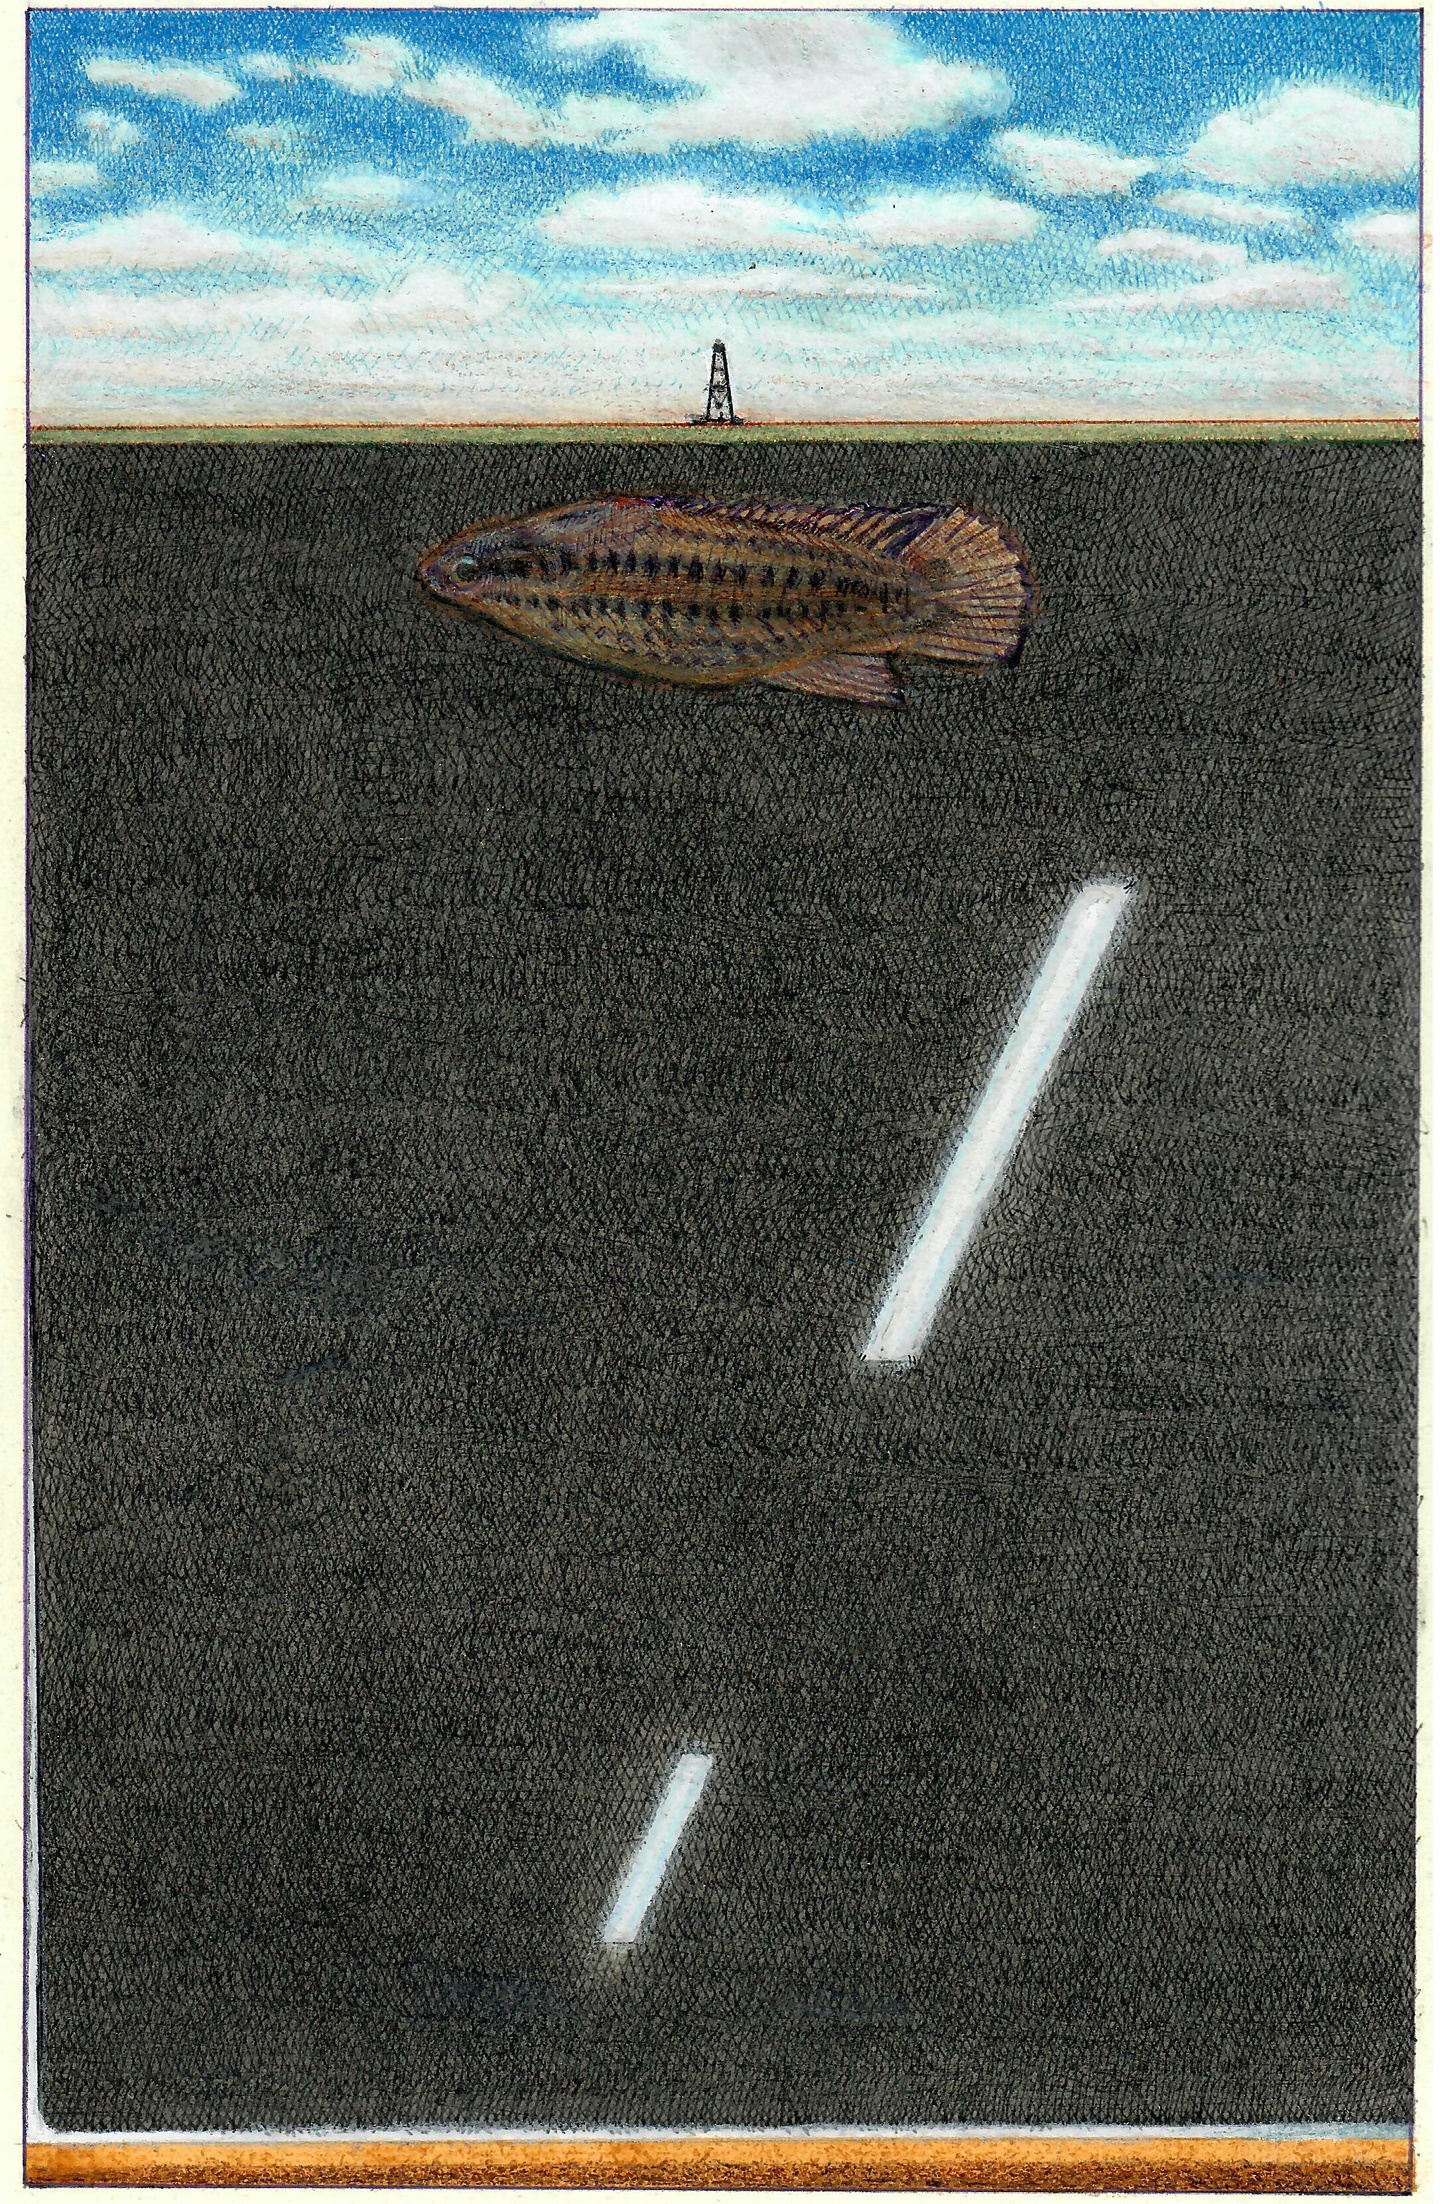 A cell tower in the distance, under a blue sky strewn with clouds; in the foreground, a fish (as if suspended) in air. The illustration is framed by a strip of (what appears to be) wood along the bottom edge.